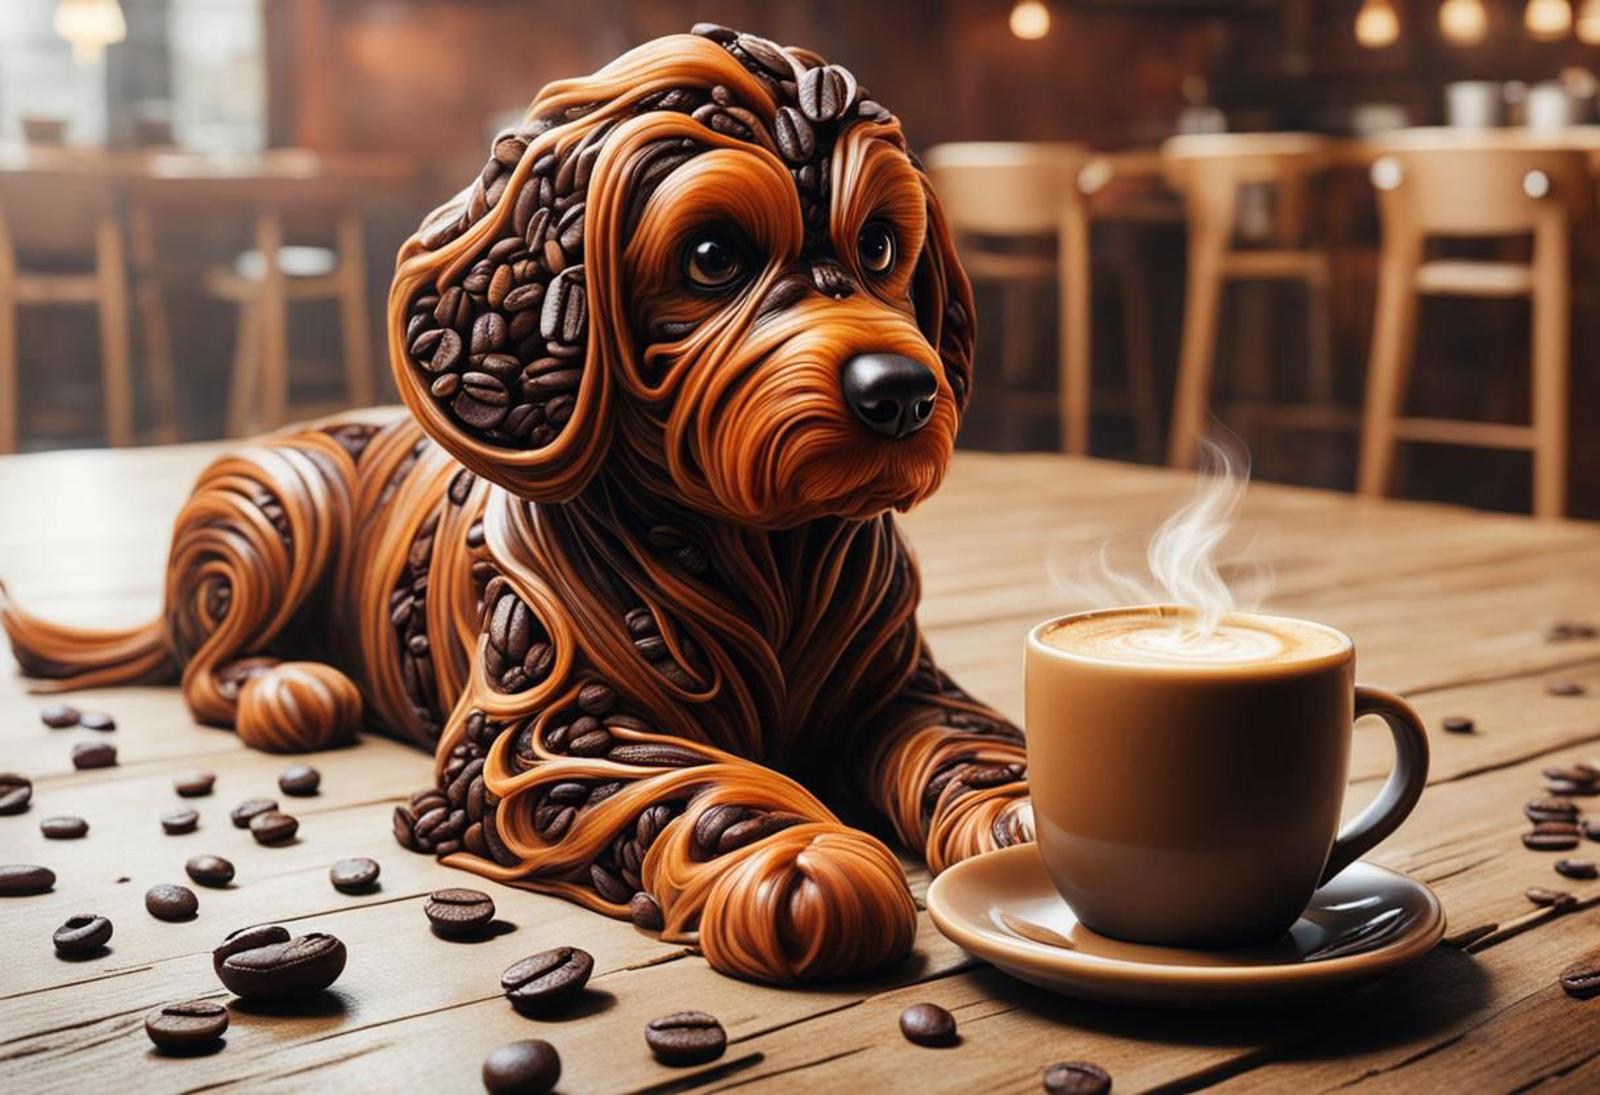 A wooden table with a cup of coffee and a dog sculpture.